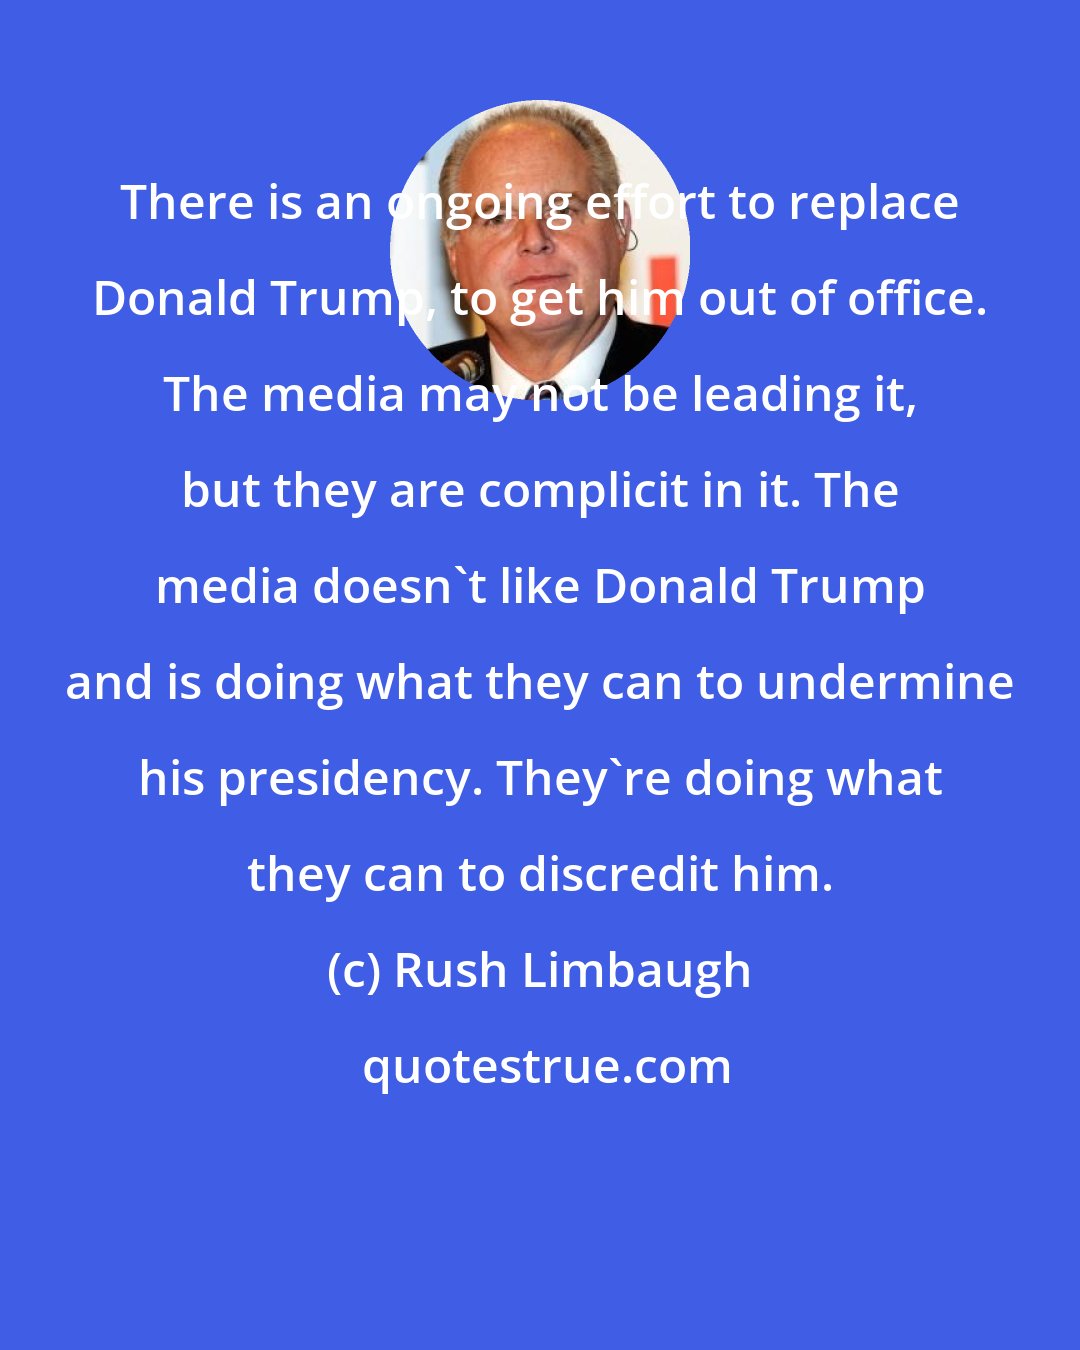 Rush Limbaugh: There is an ongoing effort to replace Donald Trump, to get him out of office. The media may not be leading it, but they are complicit in it. The media doesn't like Donald Trump and is doing what they can to undermine his presidency. They're doing what they can to discredit him.